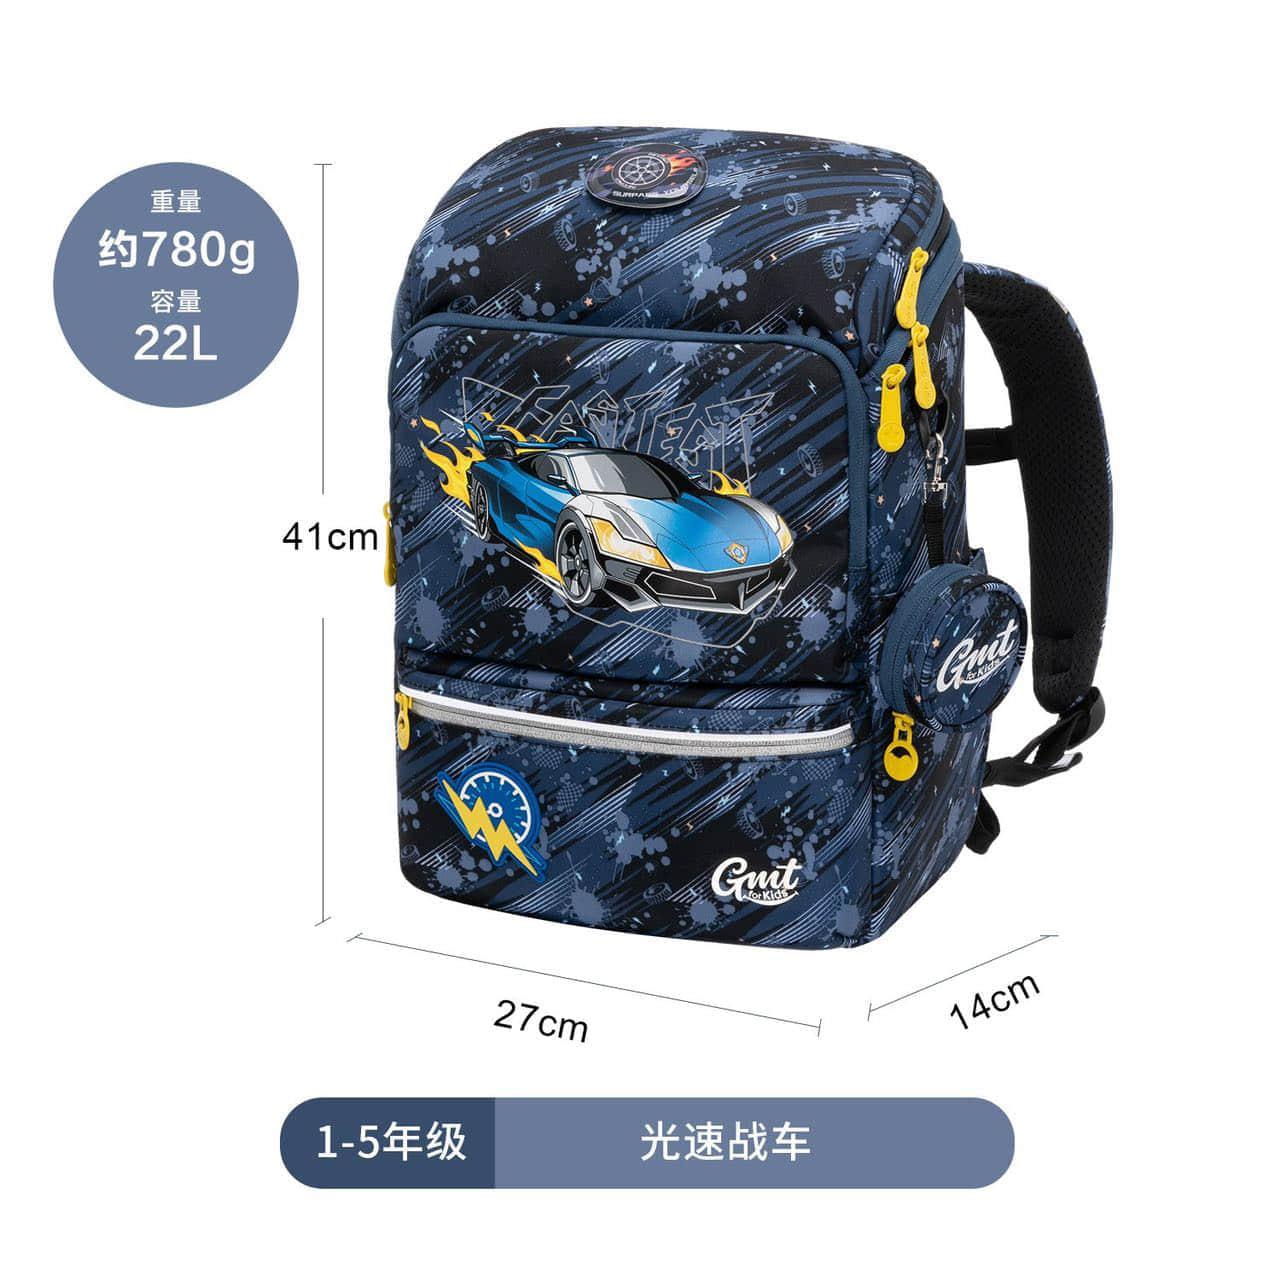 Gmt Backpack -Light Speed Vehicle